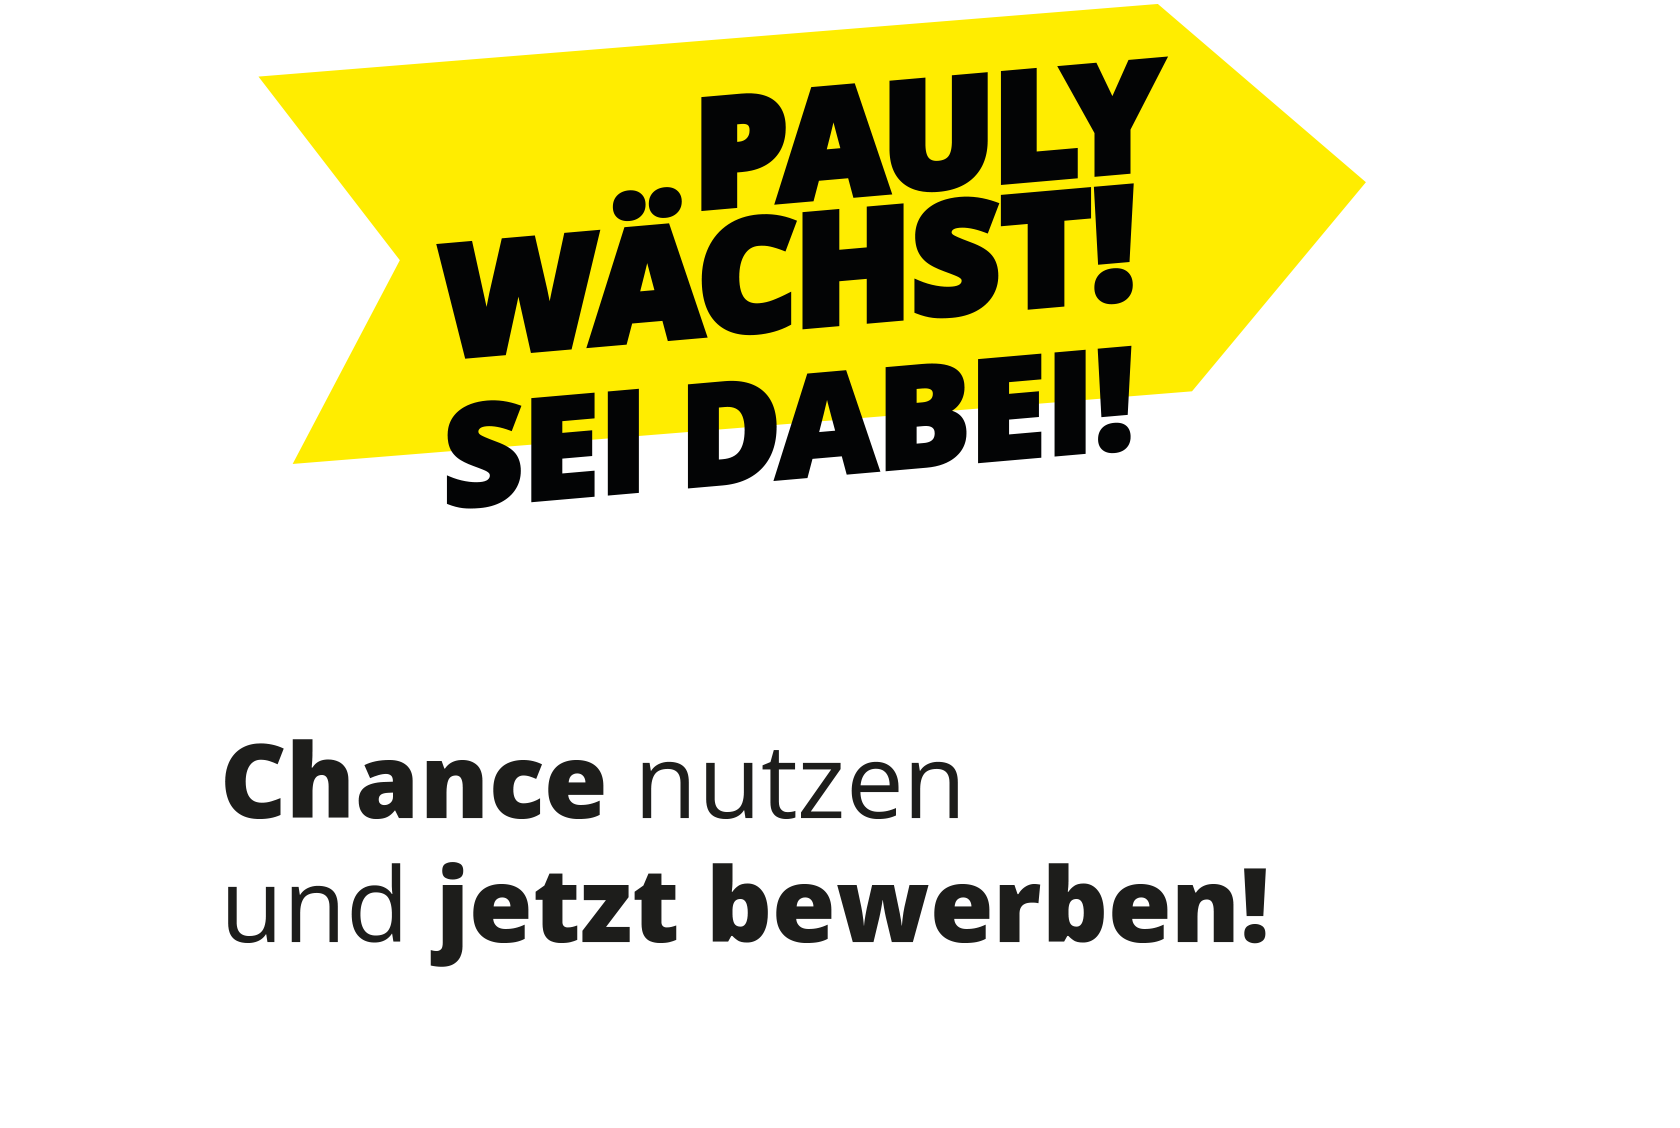 You never work alone! Pauly GmbH